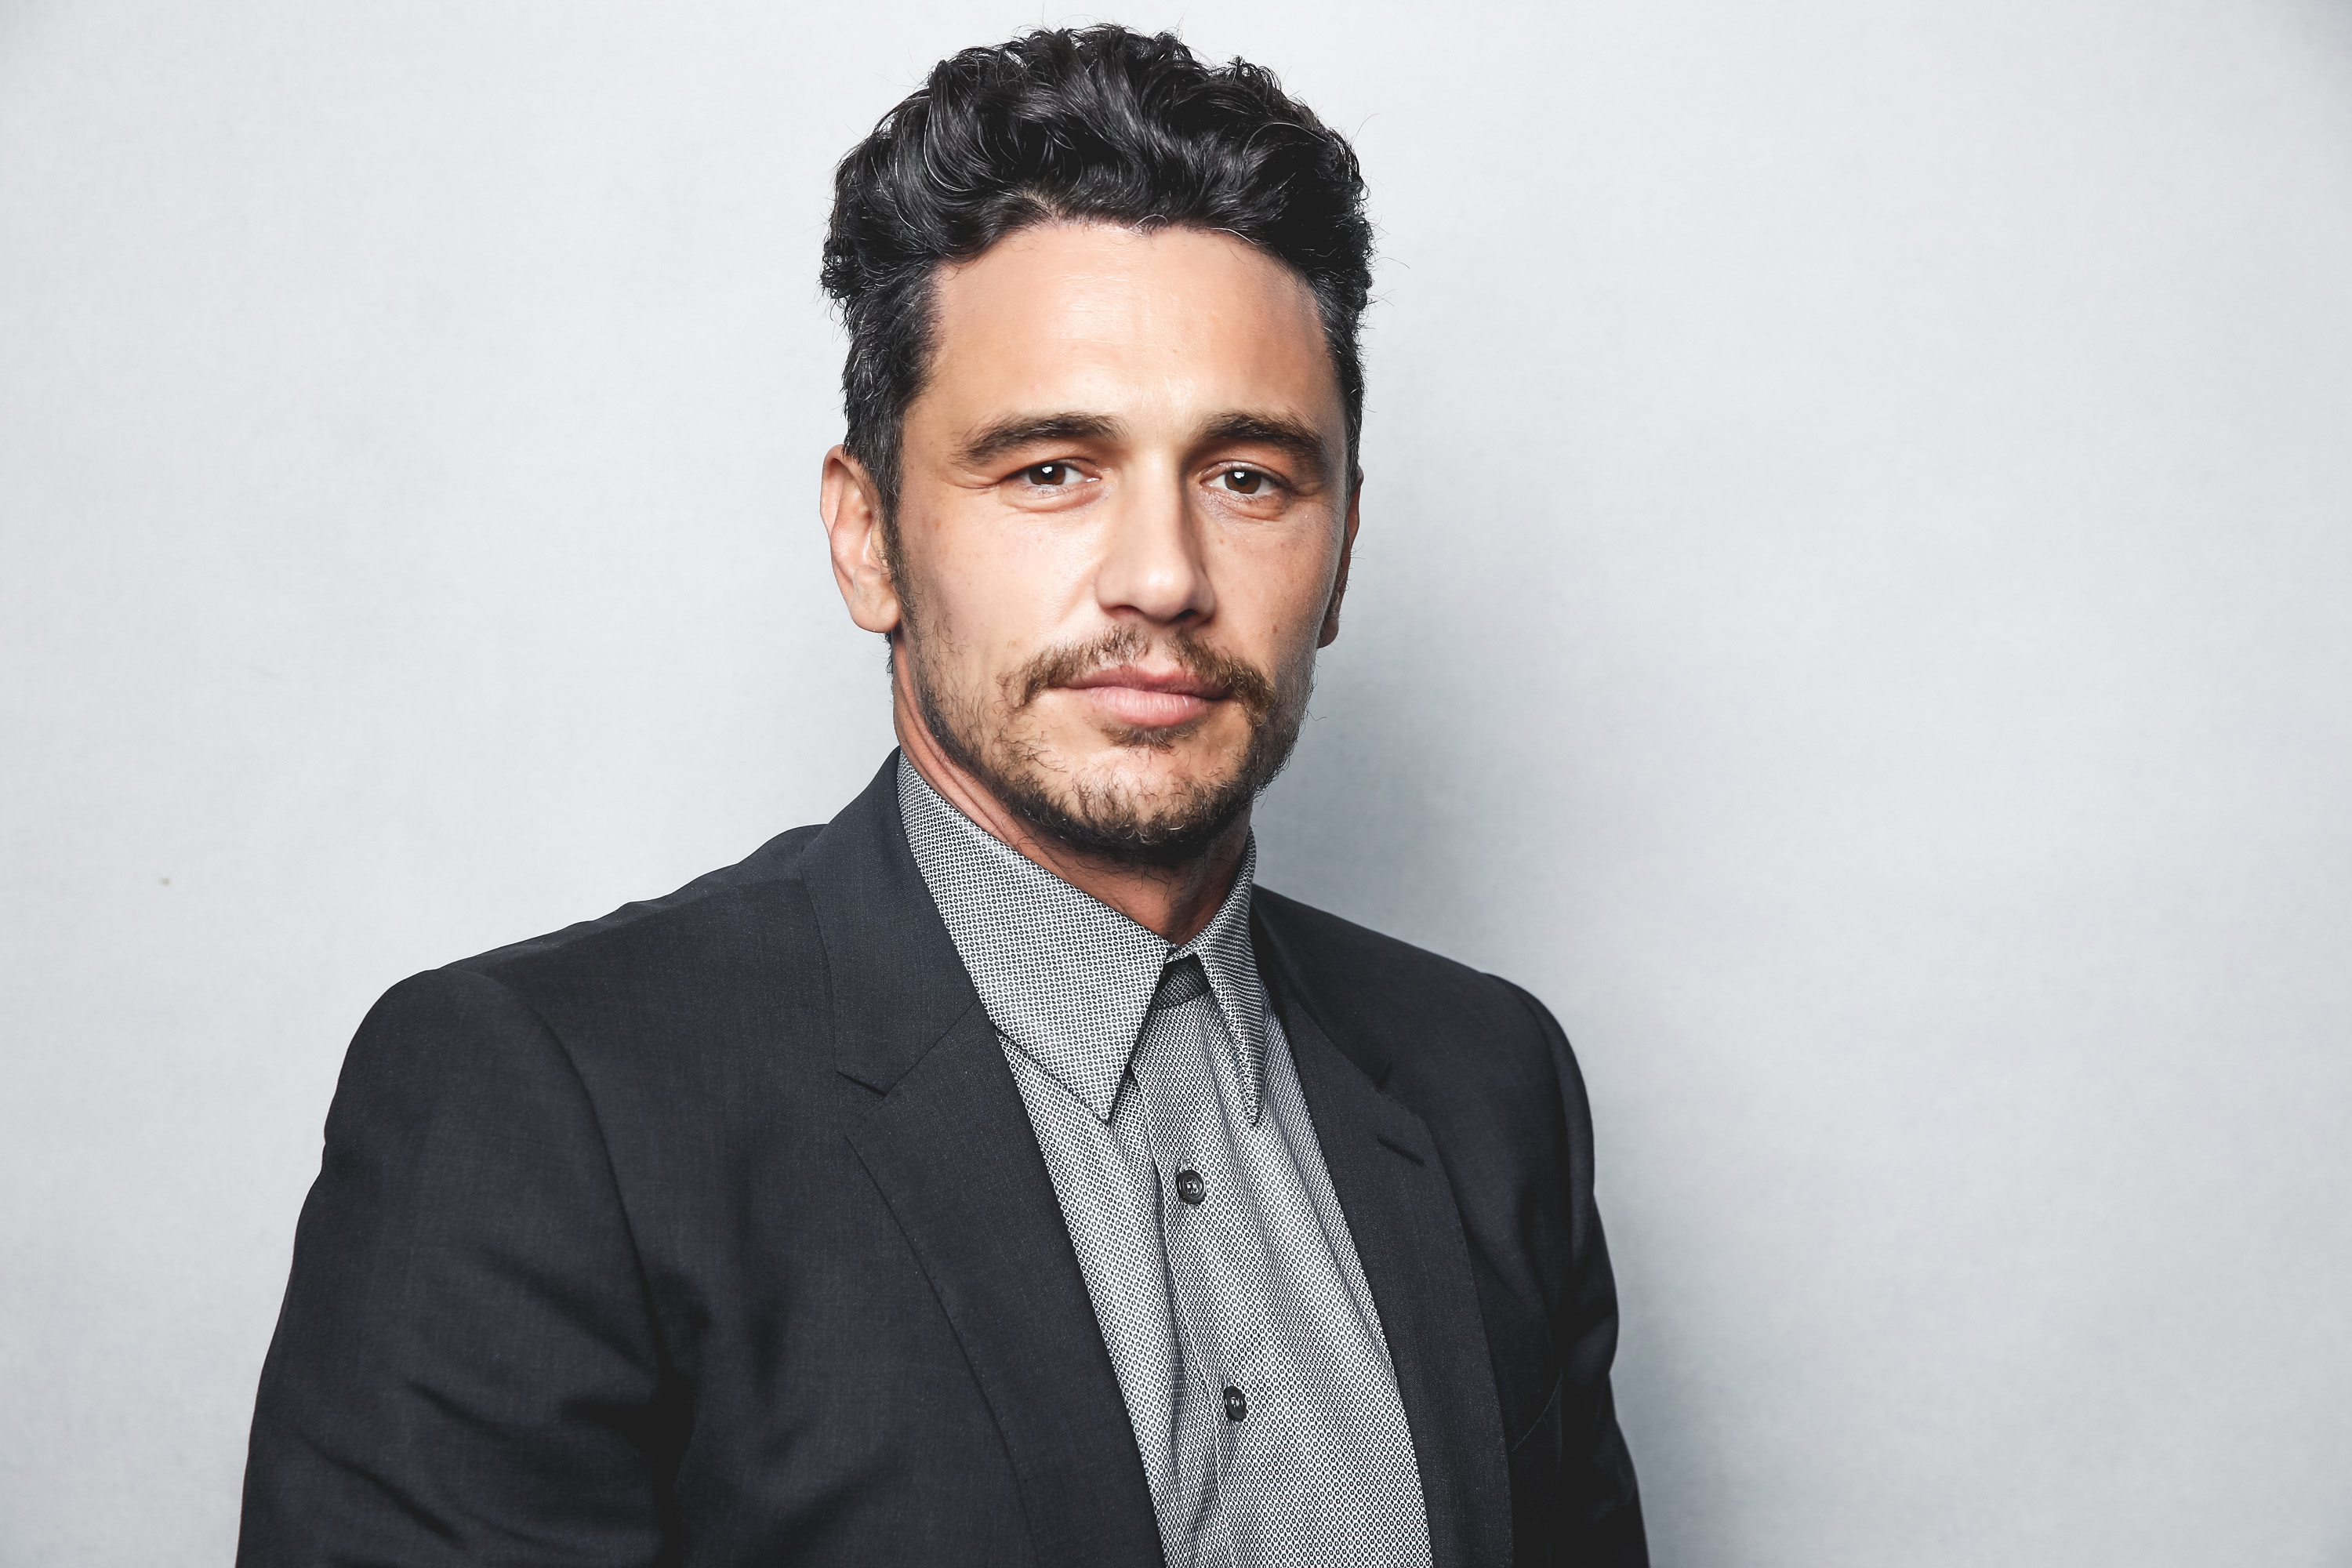 James Franco poses for a portrait at the BAFTA Los Angeles Tea Party on Jan. 6, 2018 in Beverly Hills, California. (Rich Fury—Getty Images)